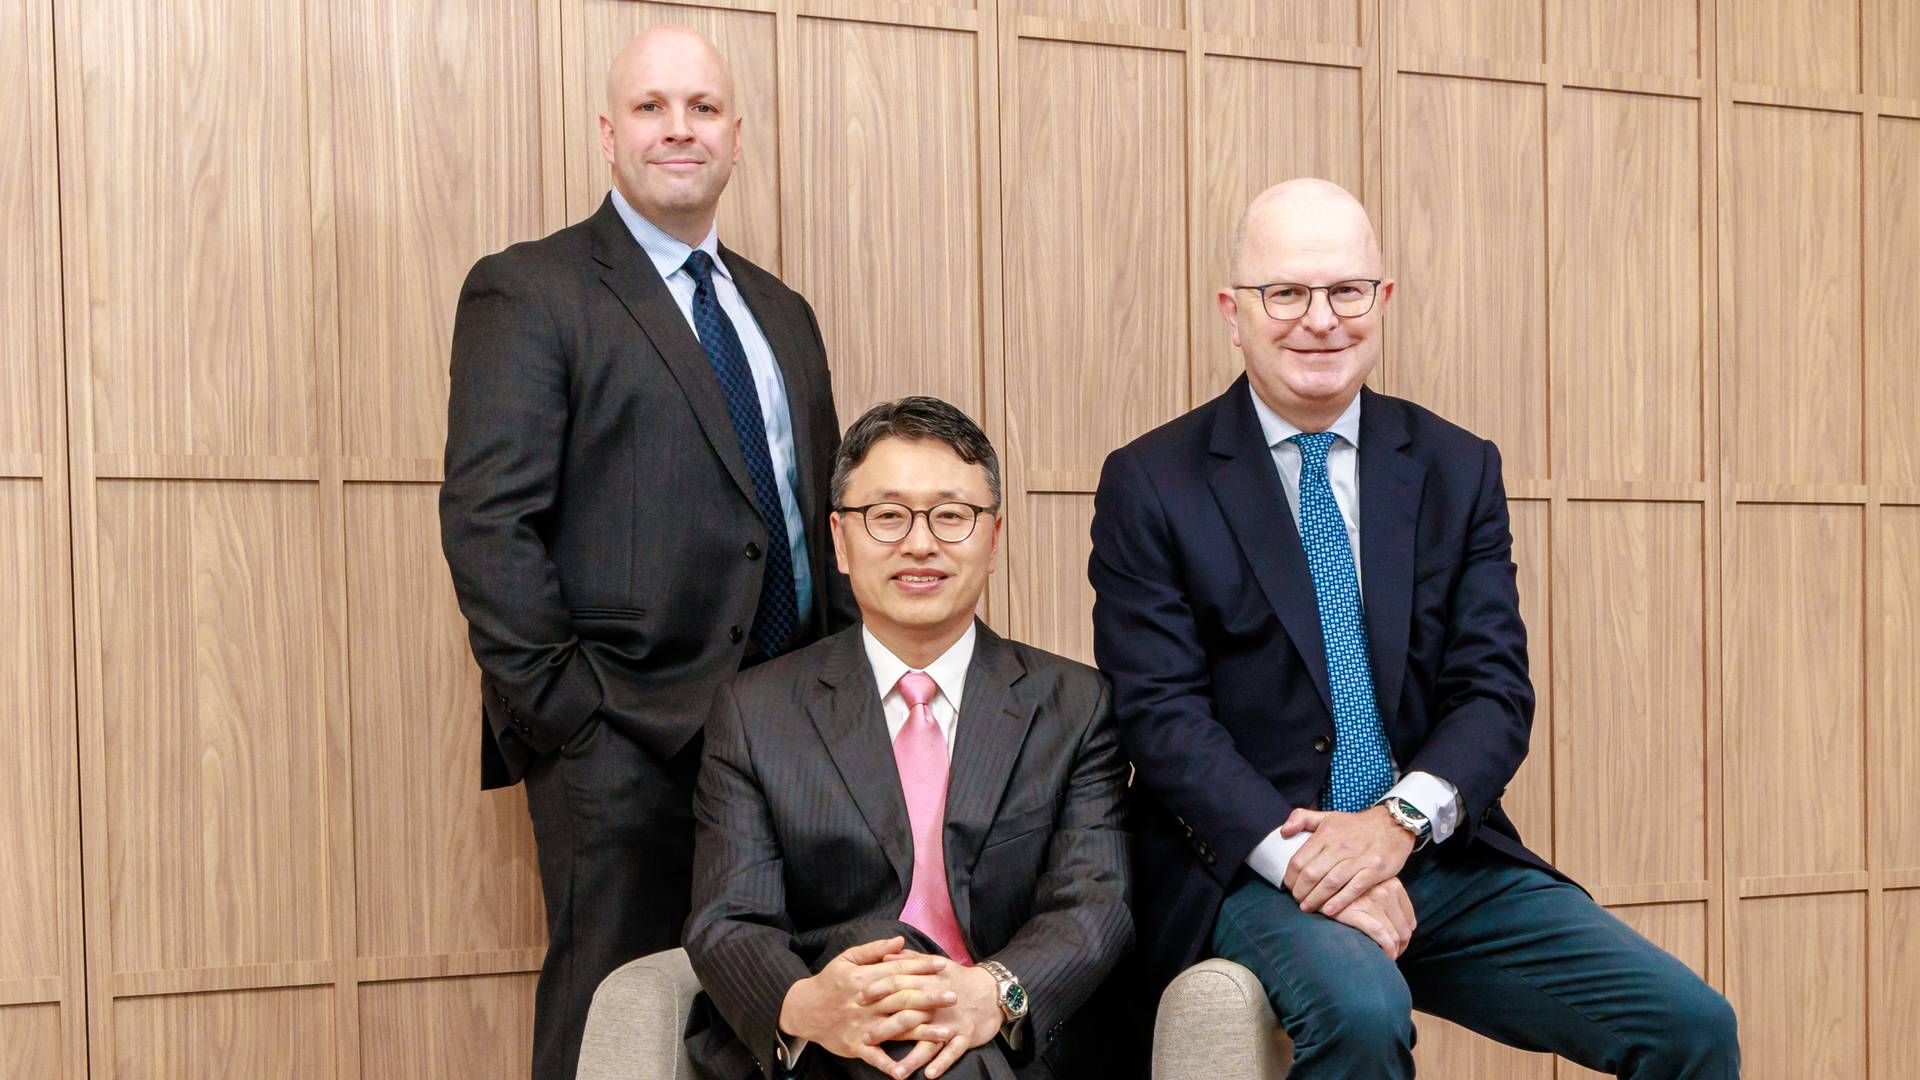 NorthStandard's COO Asia Pacific, James Moran, Claims Director Shang Doe Shim, and Head of Asia Pacific David Roberts. | Photo: Northstandard